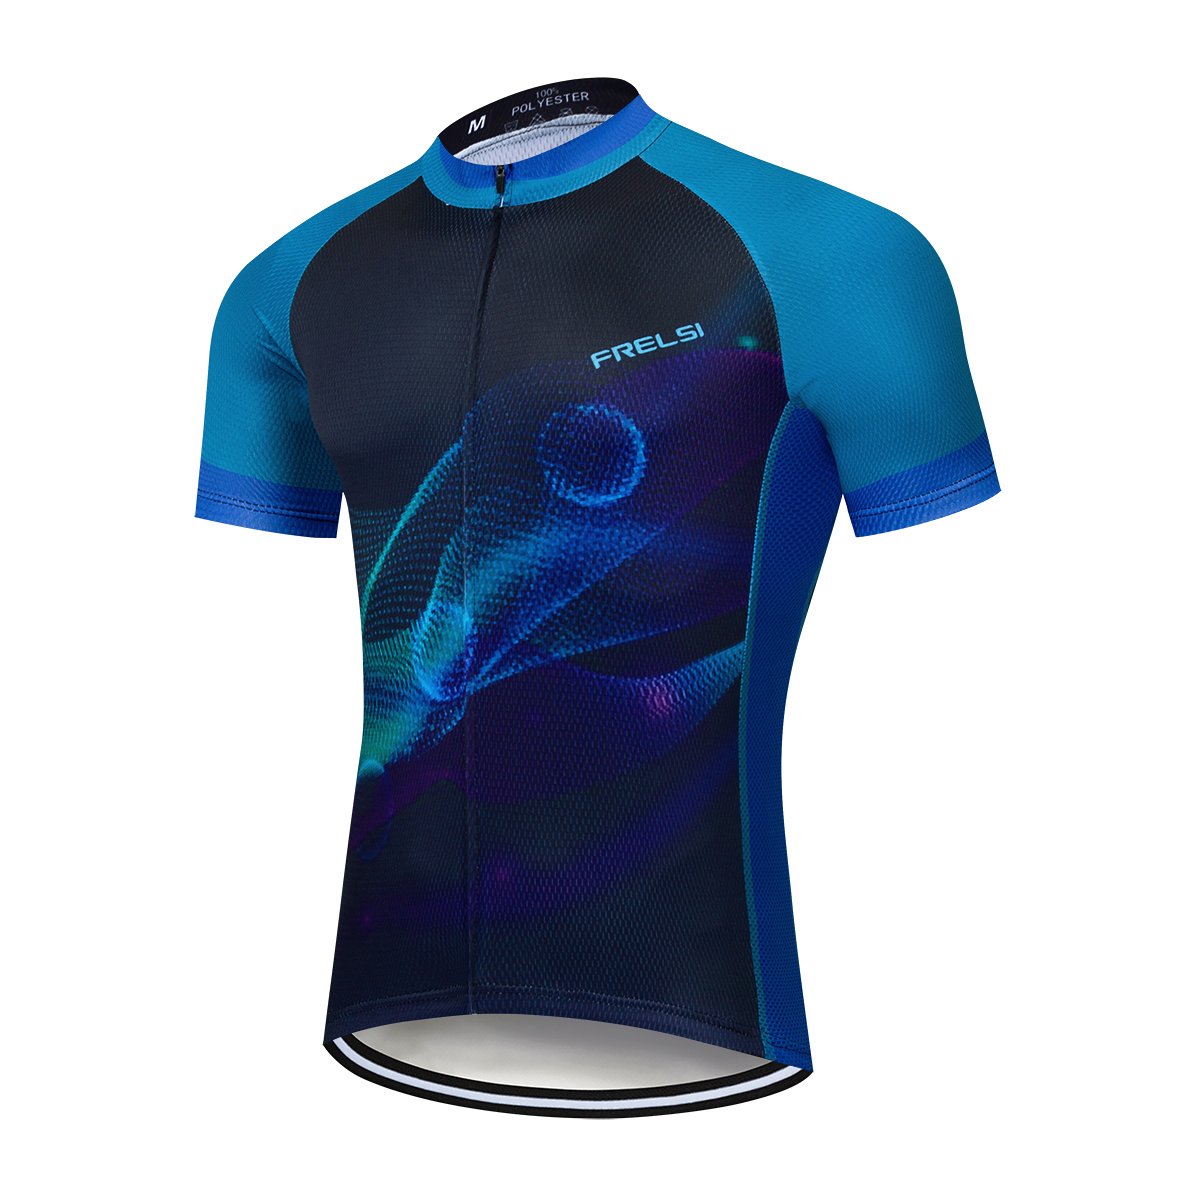 Space Rider | Men's Short Sleeve Cycling Jersey